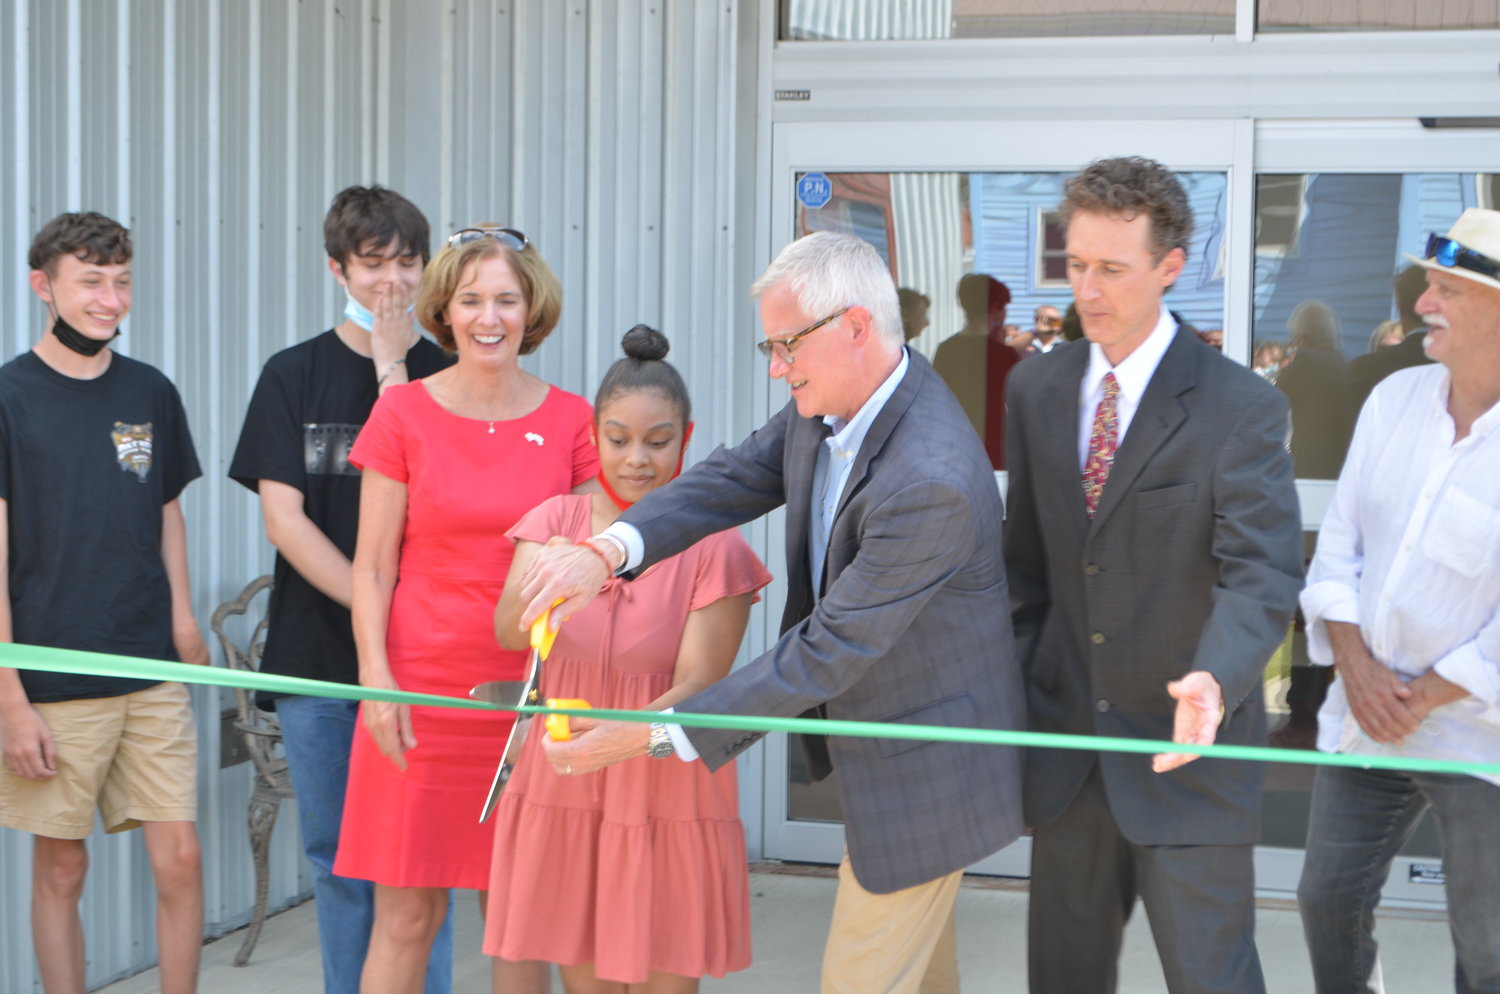 TCFD President and Dr. Theresa Hamlin, left, SUNY Sullivan President Jay Quaintance, CCHS Director Jack Comstock and TCFD CEO Patrick H. Dolland help cut the ribbon on the new Collaborative College High School.